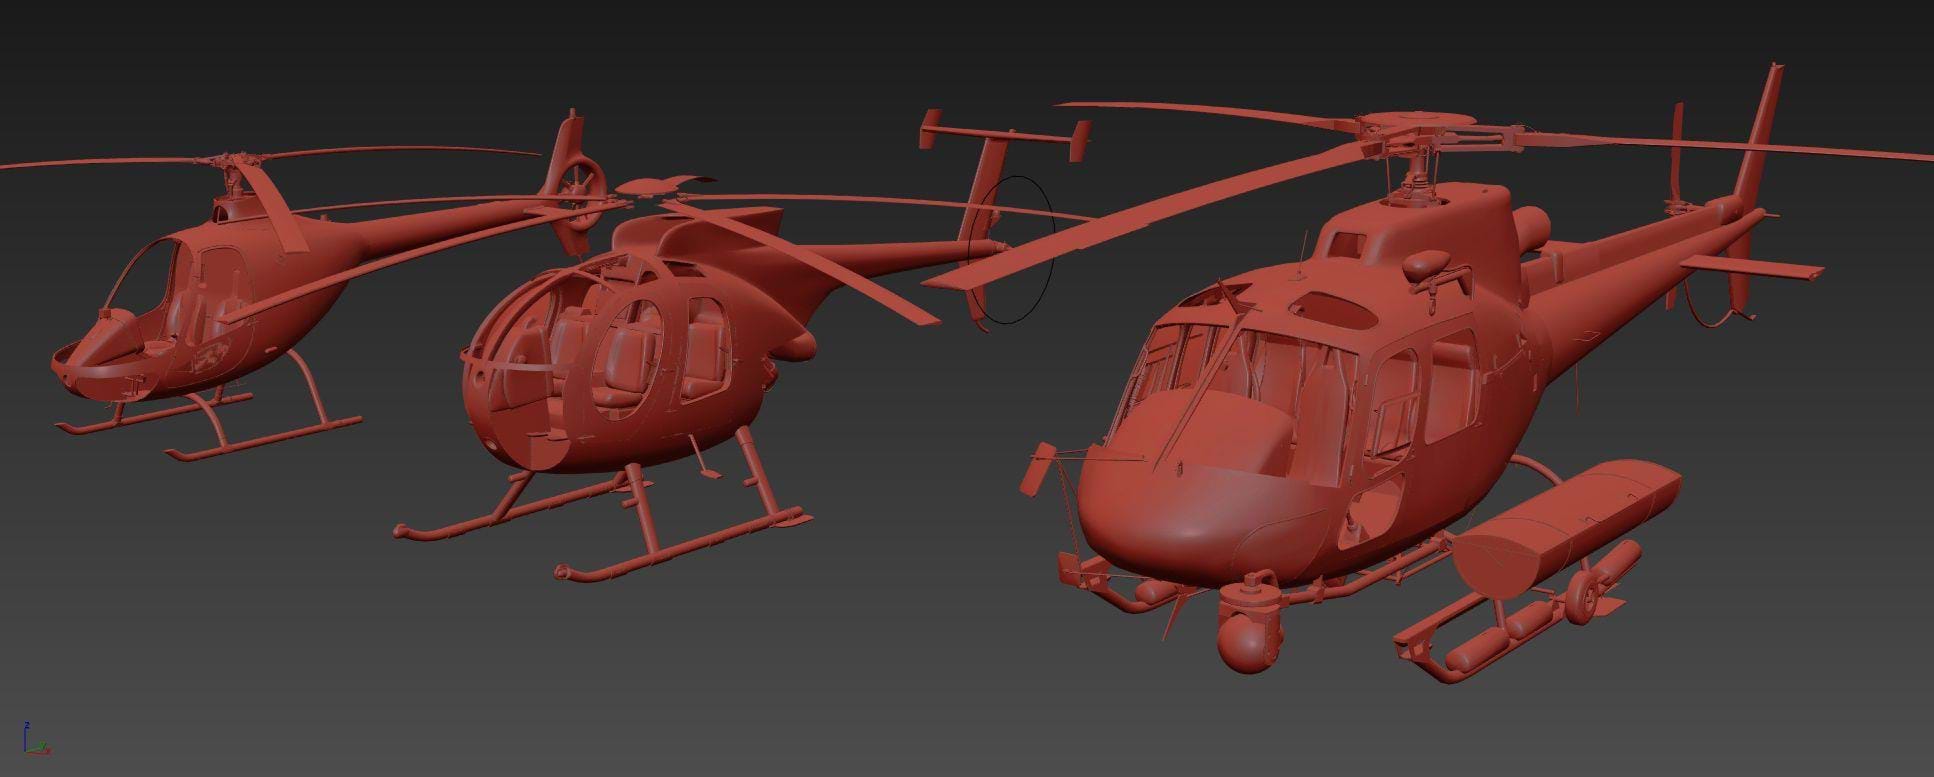 DreamFoil Creations Cabri G2, MD-500, AS350 for X-Plane